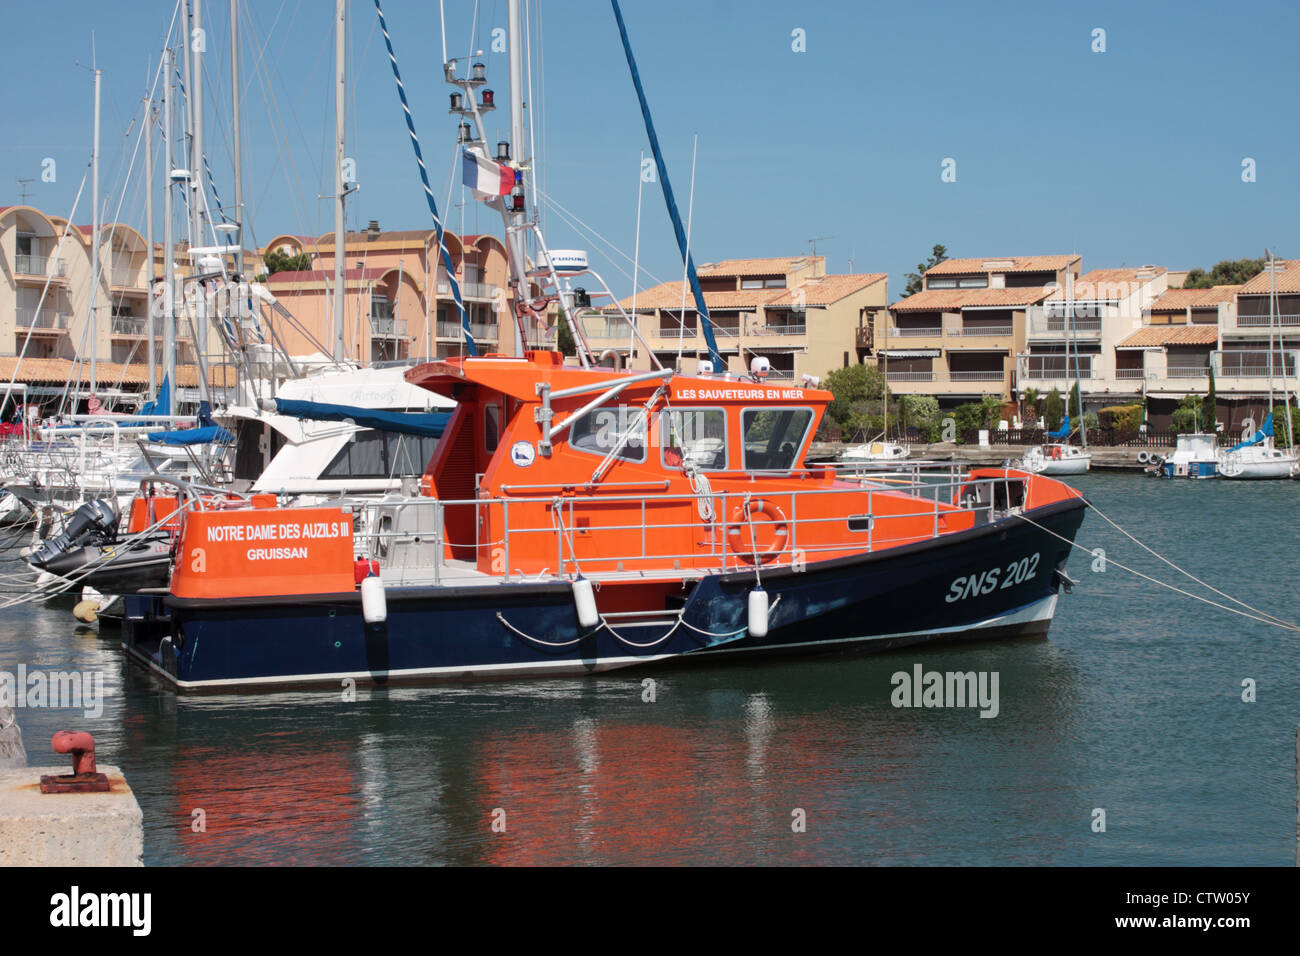 Lifeboat on standby Gruissan harbour Languedoc-Roussillon France Stock Photo